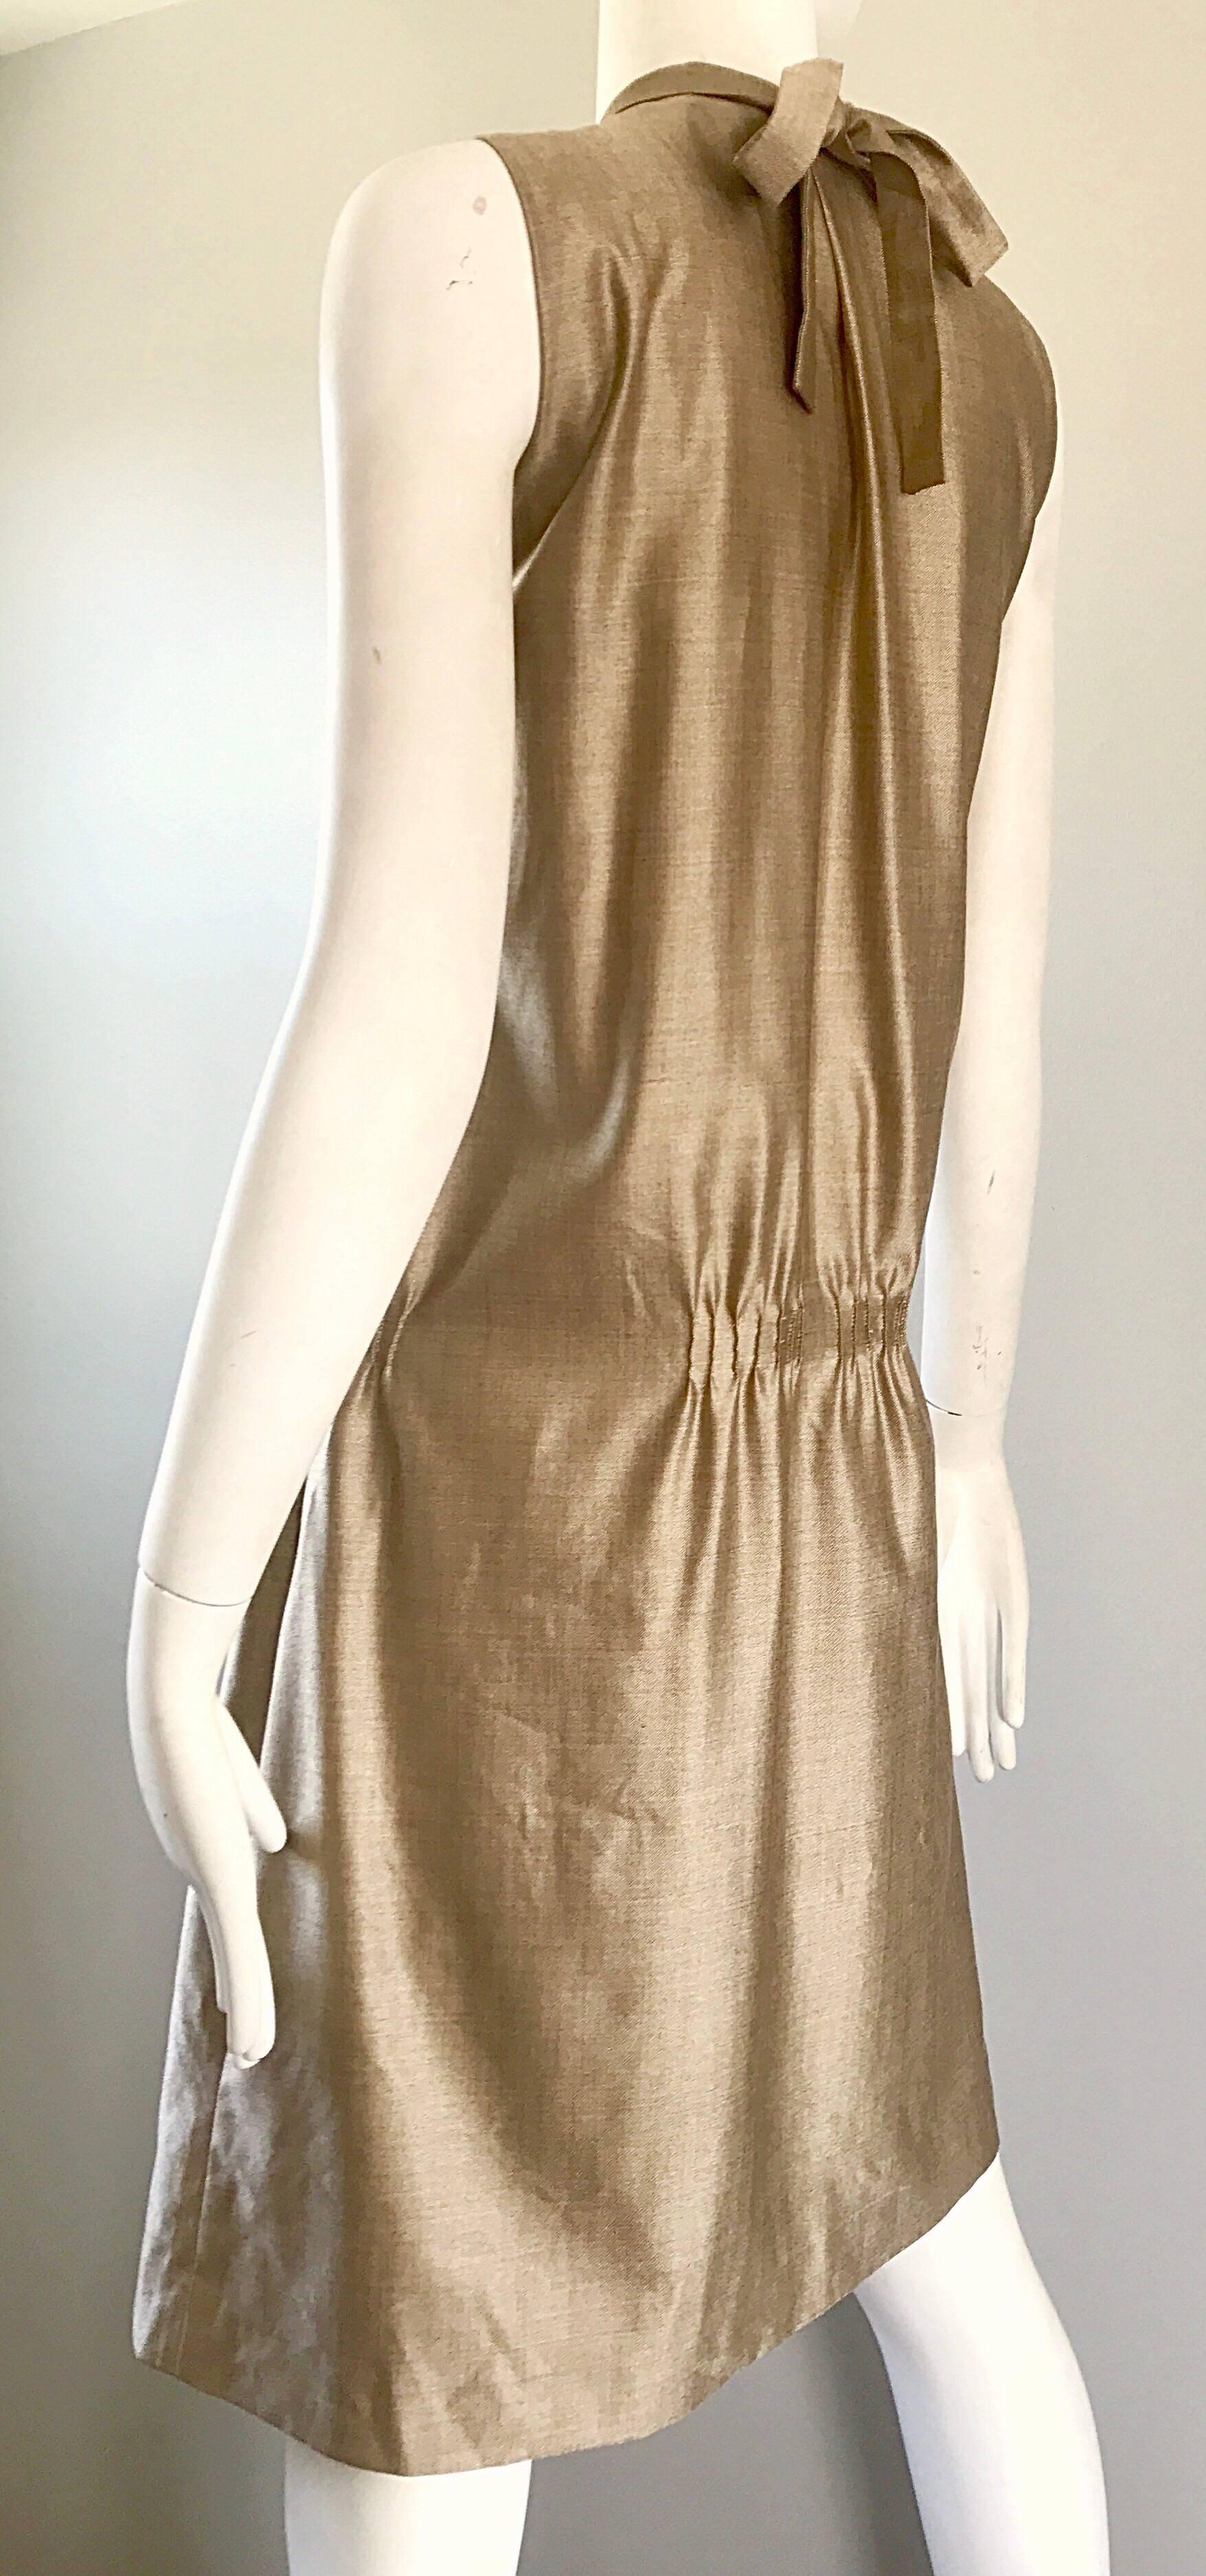 Brown Luca Luca Size 42 / 12 Gold Metallic Silk Deco Style Sequin Bib 20s Style Dress For Sale